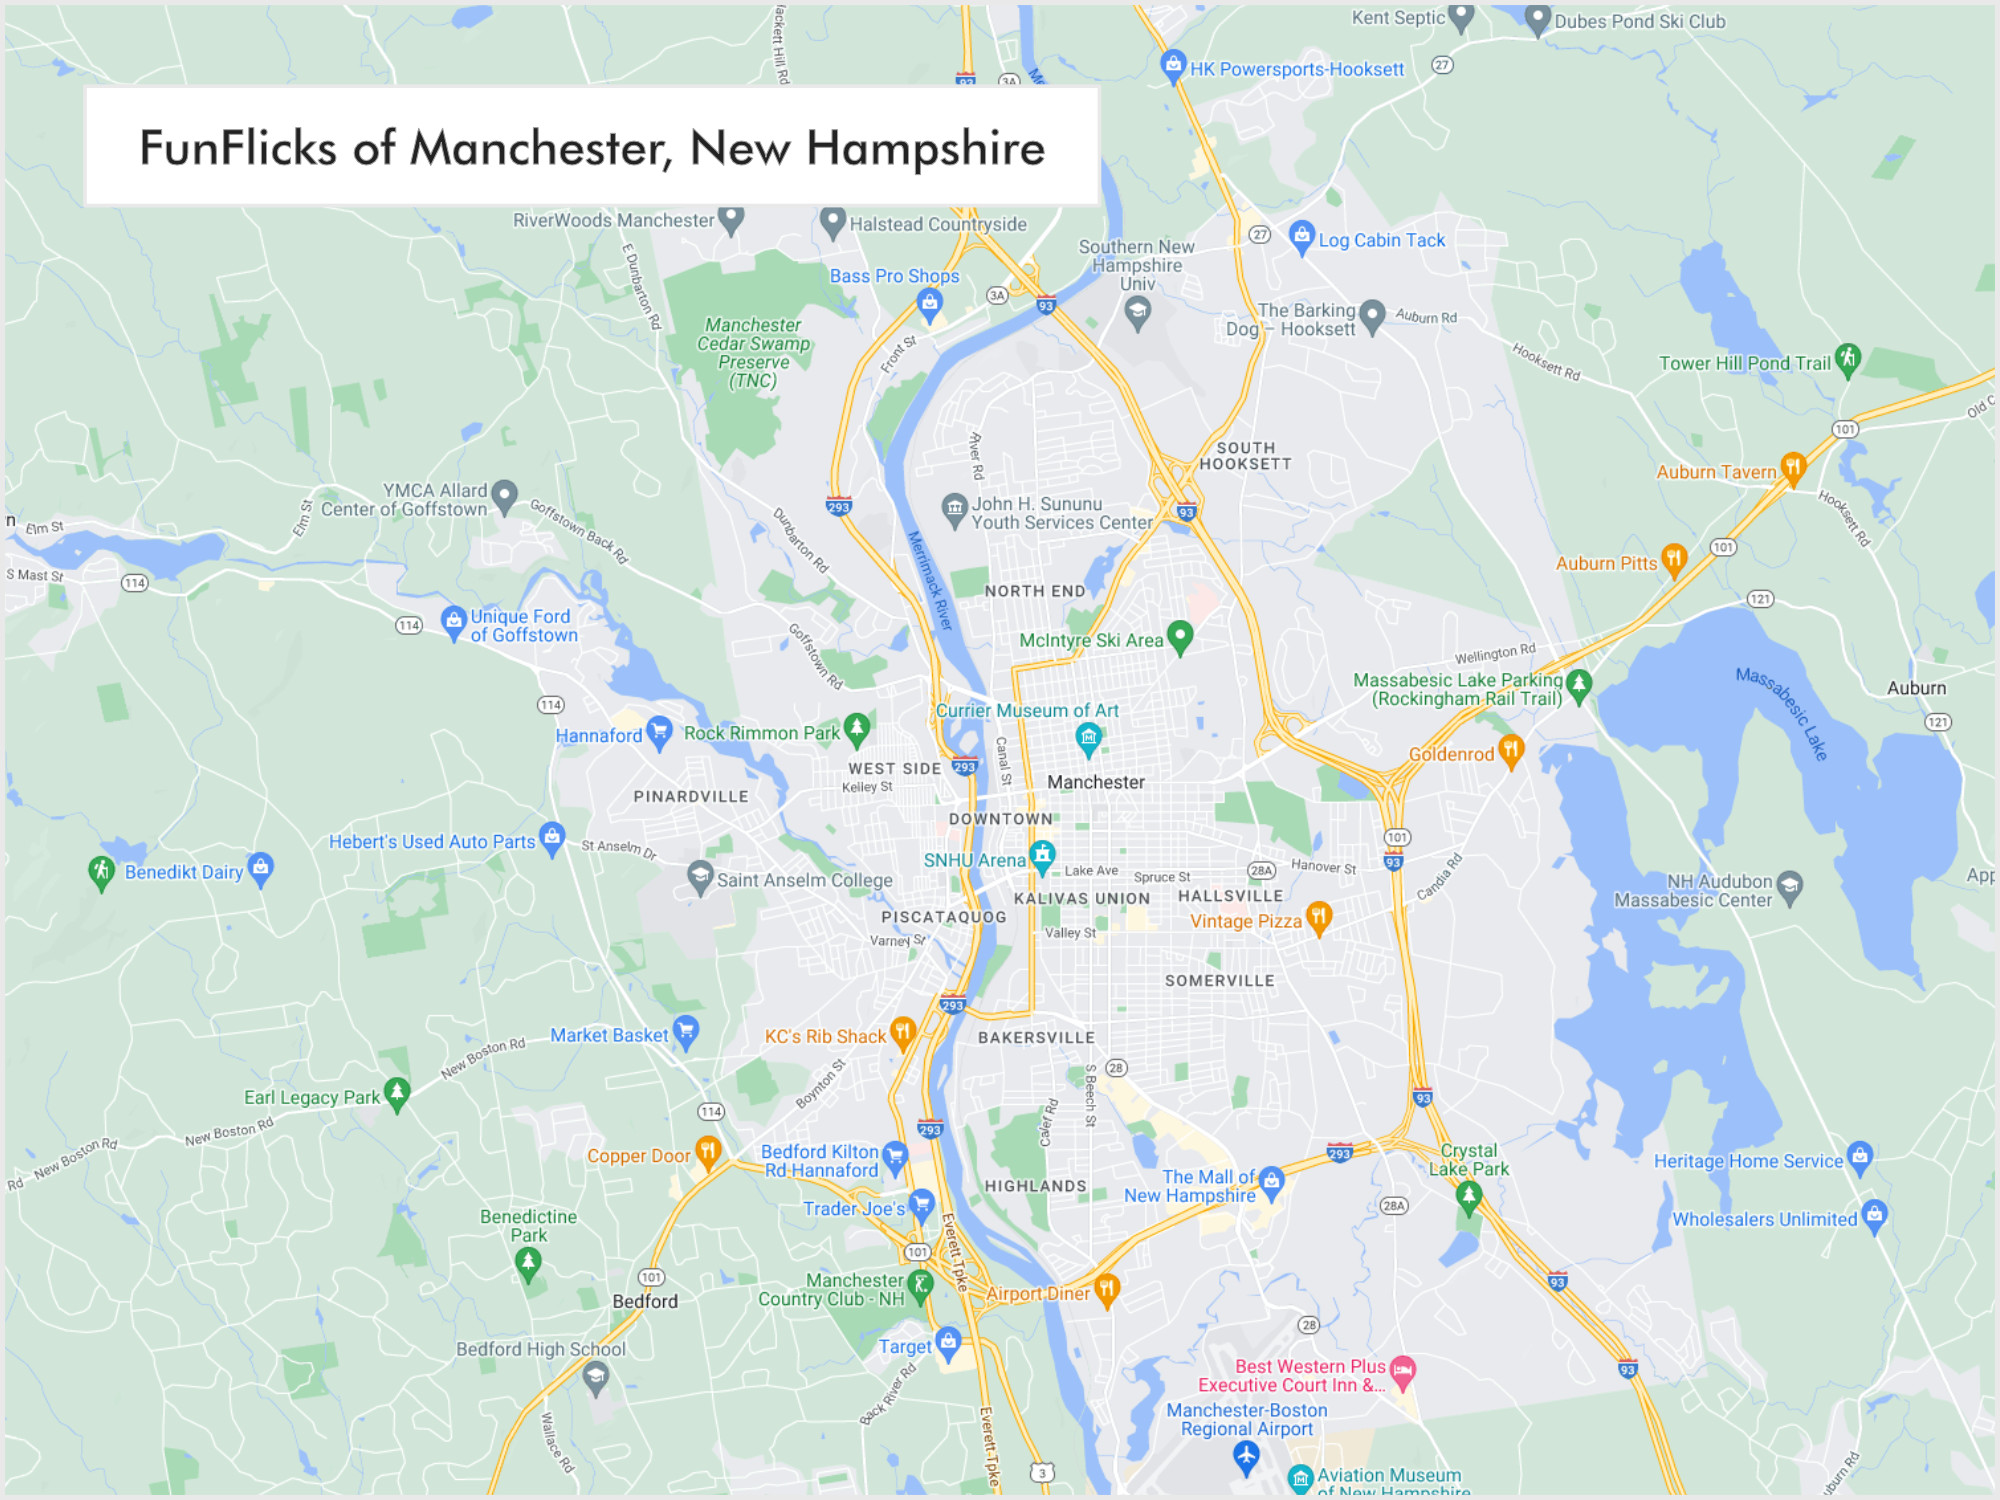 FunFlicks® Manchester territory map